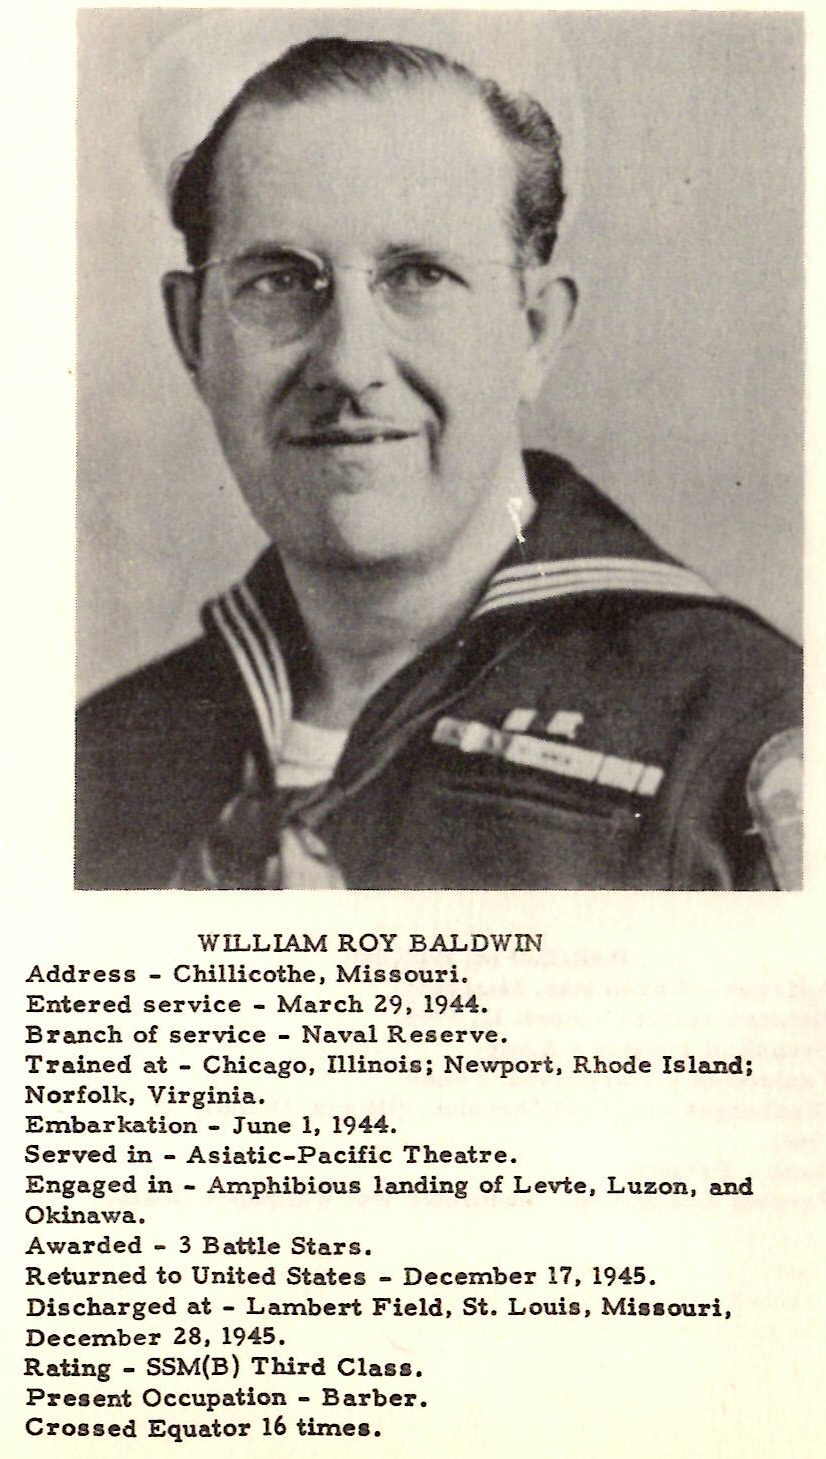 WILLIAM ROY BALDWIN Address - Chillicothe, Missouri. Entered service - March 29, 1944. Branch of service .. Naval Reserve. Trained at - Chicago, Illinois; Newport, Rhode Island; Norfolk, Virginia, Embarkation .. June 1, 1944. Served in - Asiatic-Pacific Theatre. Engaged in - Amphibious landing of Levte, Luzon, and Okinawa. Awarded - 3 Battle Stars, Returned to United States - December 17, 1945. Discharged at - Lambert Field, St, Louis, Mia• ouri1 December 28, 1945 . Rating - SSM(B} Third Clas• , Present Occupation - Barber. Crossed Equator 16 time• ,